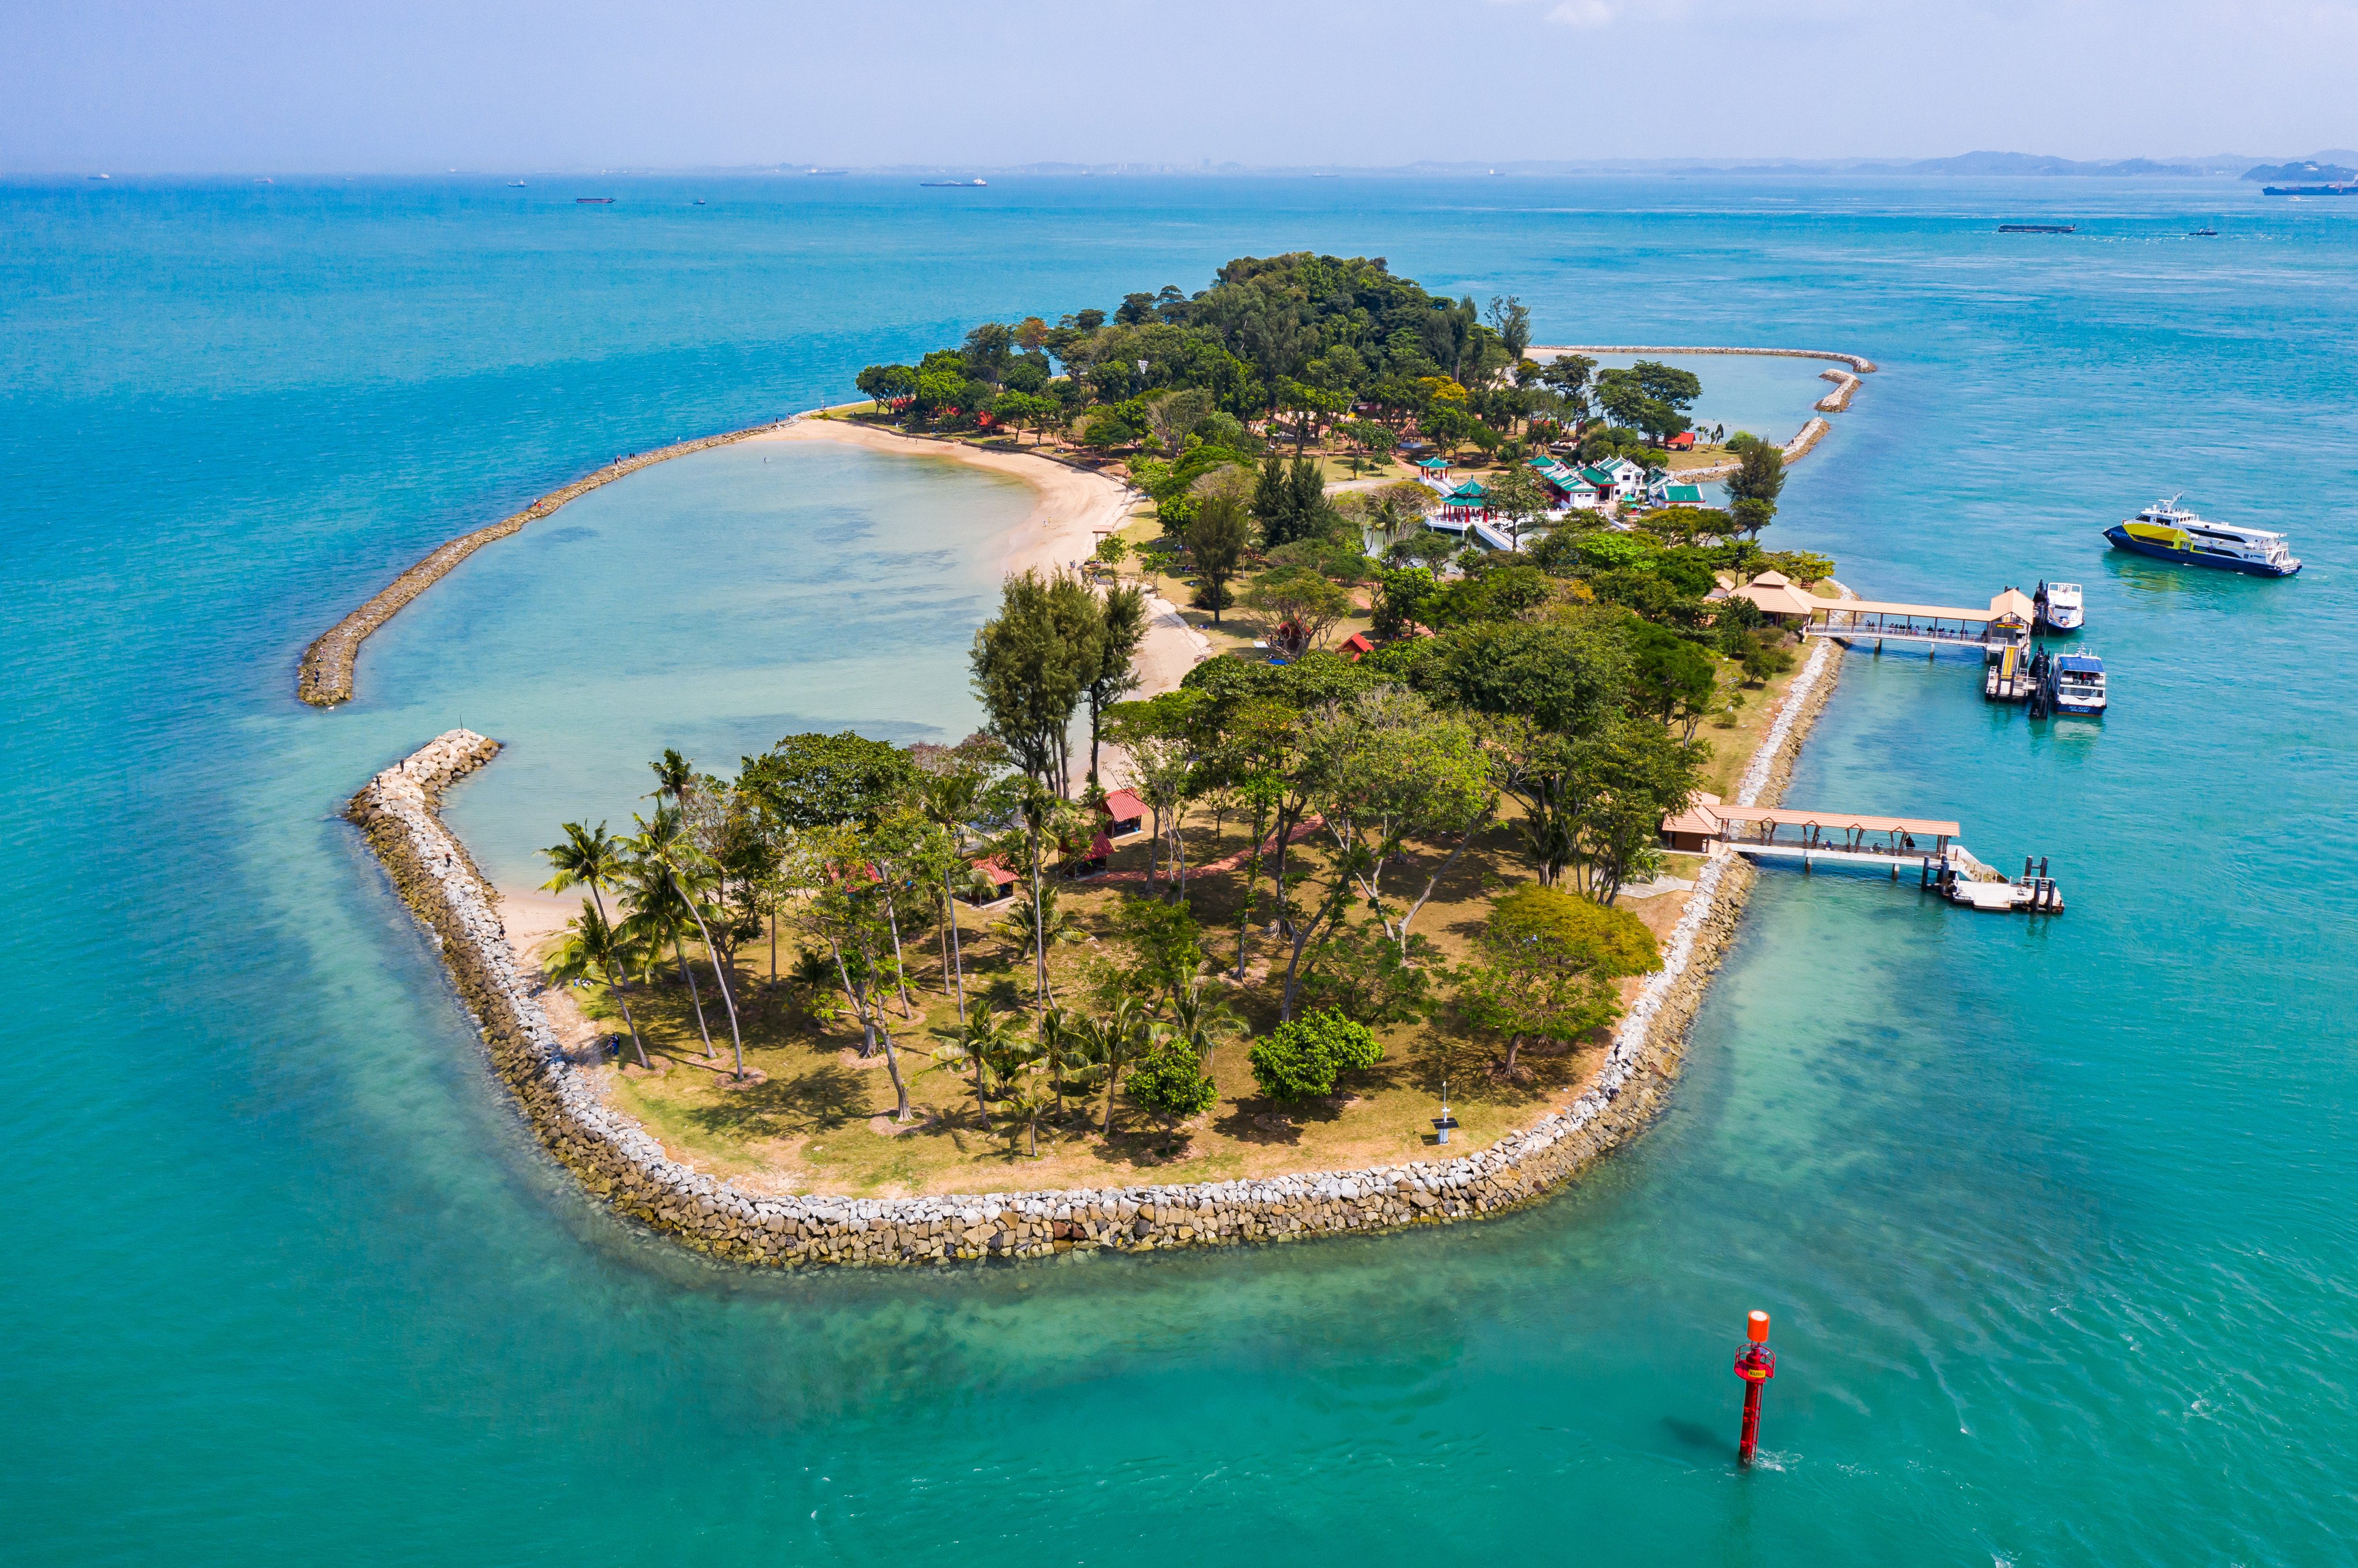 Singapore’s Kusu (Tortoise) Island, which lies 5.6km from the mainland, is now fully sustainable, using solar power to produce its own water and electricity. Photo: Shutterstock